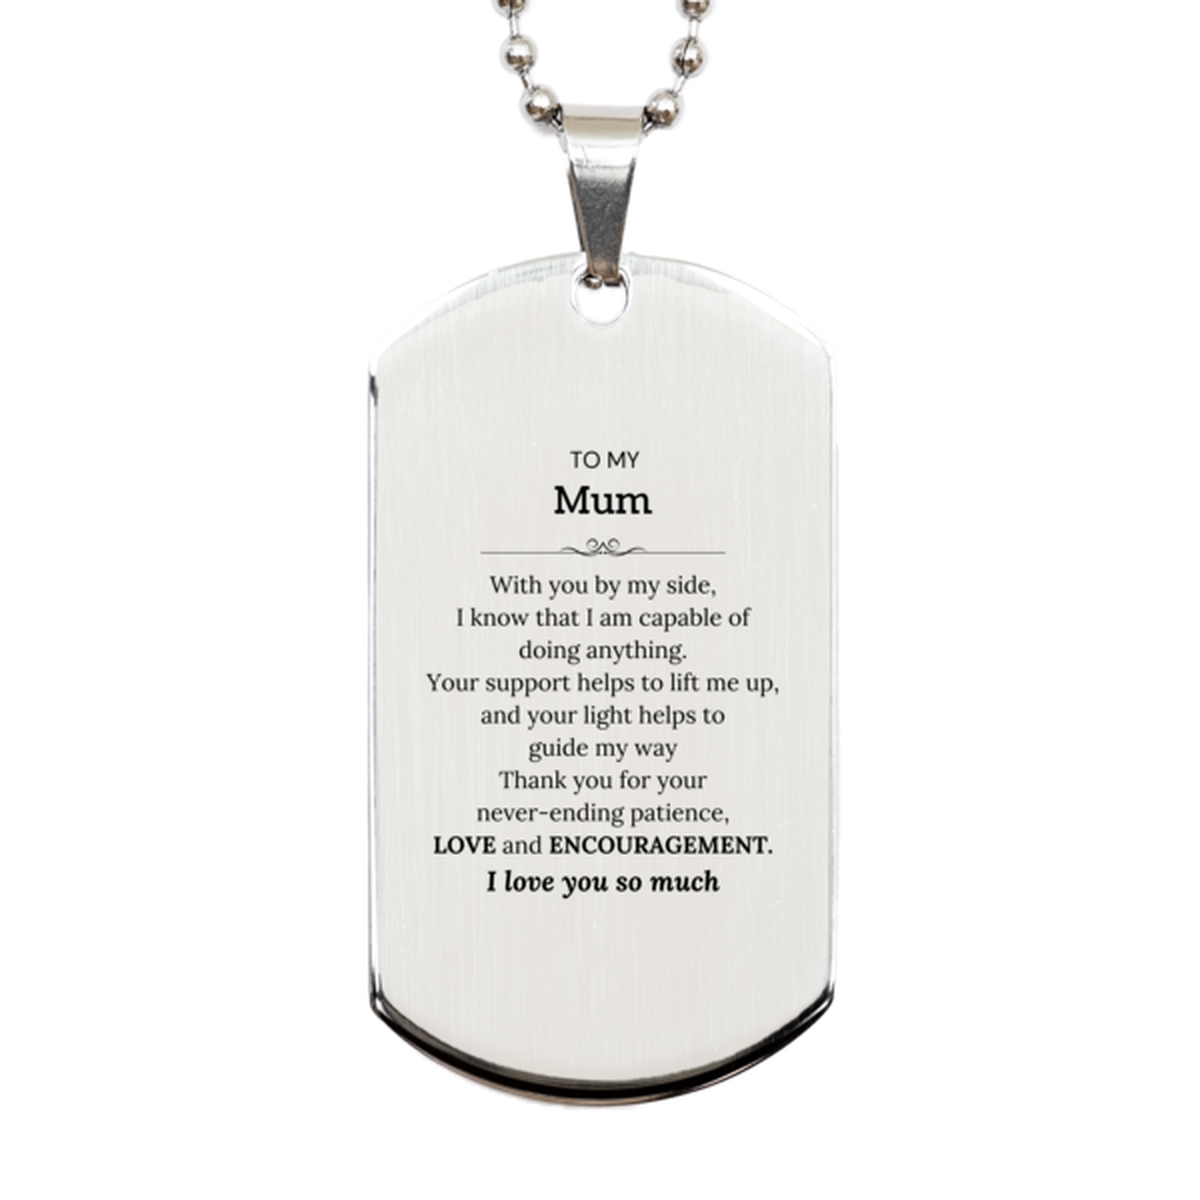 Appreciation Mum Silver Dog Tag Gifts, To My Mum Birthday Christmas Wedding Keepsake Gifts for Mum With you by my side, I know that I am capable of doing anything. I love you so much